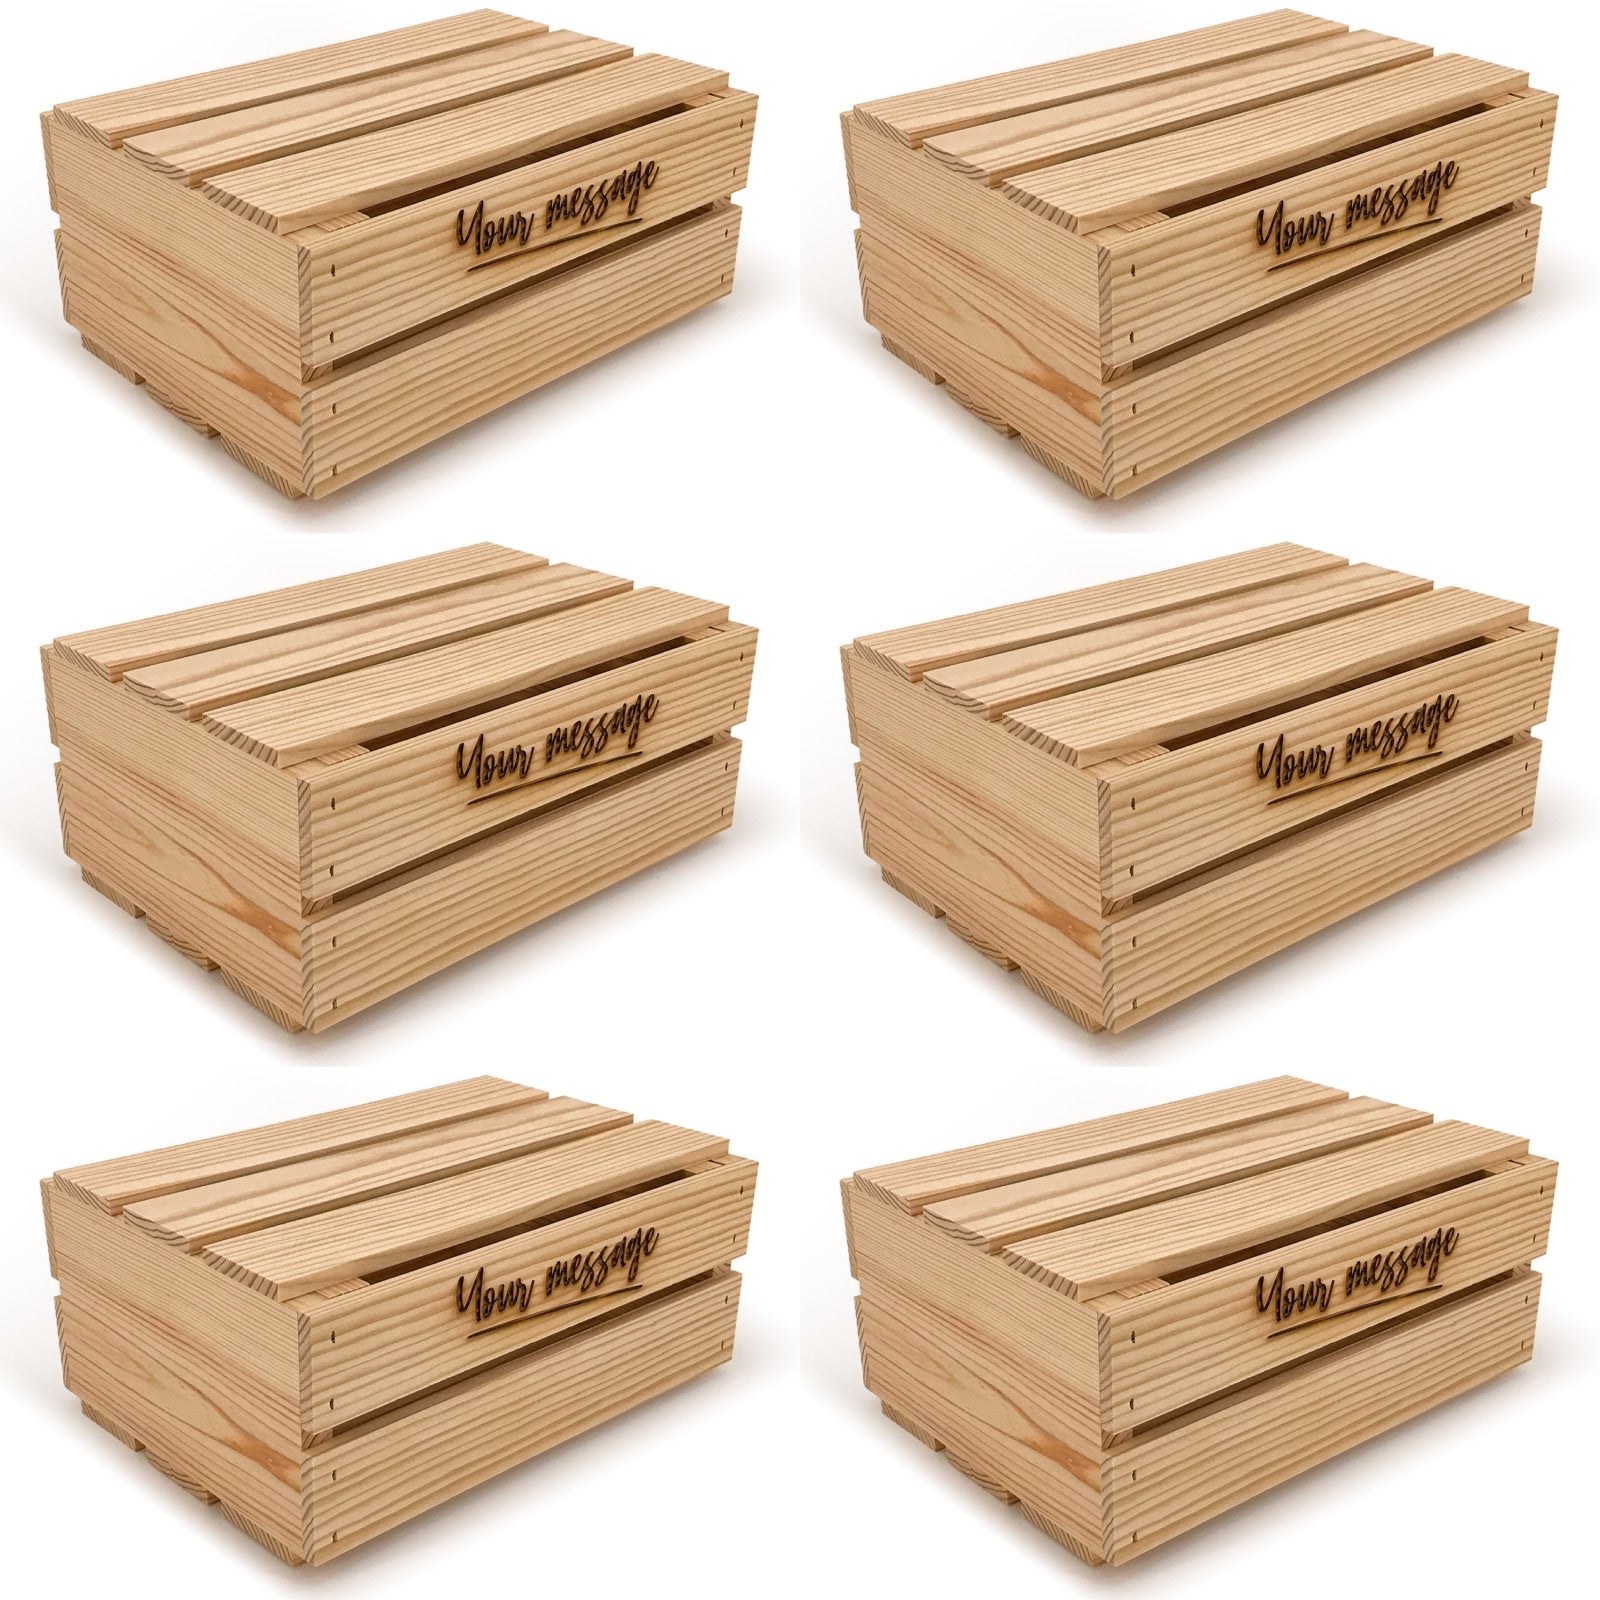 6 Small wooden crates with lid and custom message 12x9x5.25